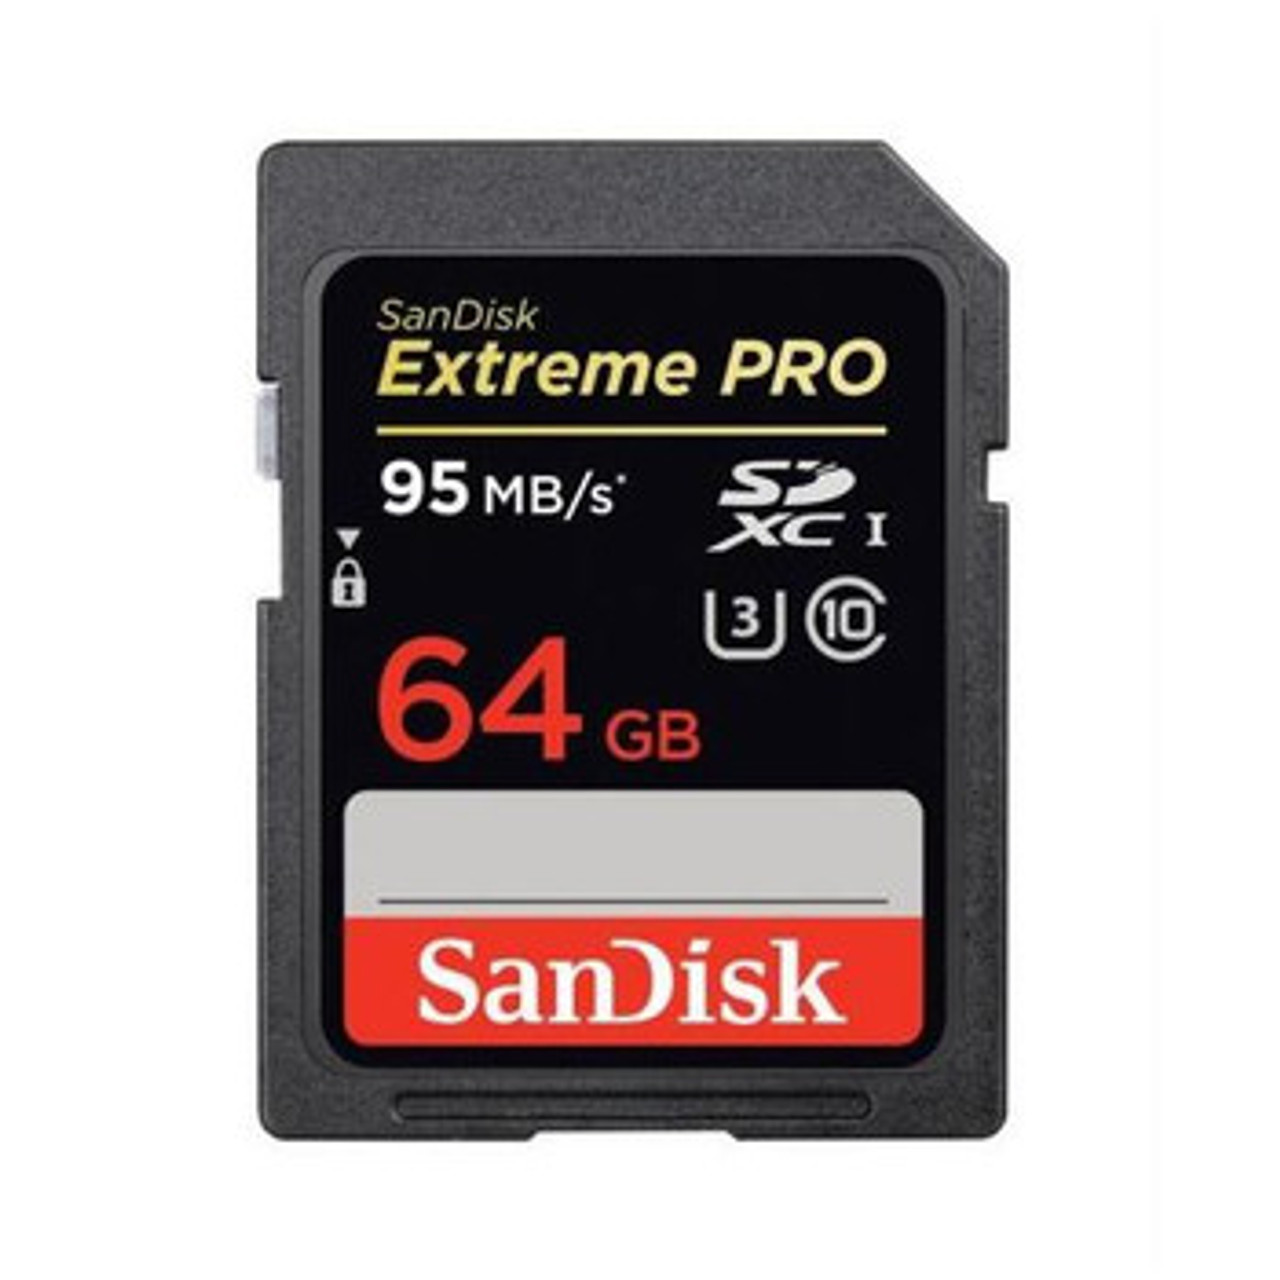 SDSDXP-064G-A46 | Sandisk | Extreme Pro 64Gb Class 10 Sdxc Uhs-I Flash Memory Card